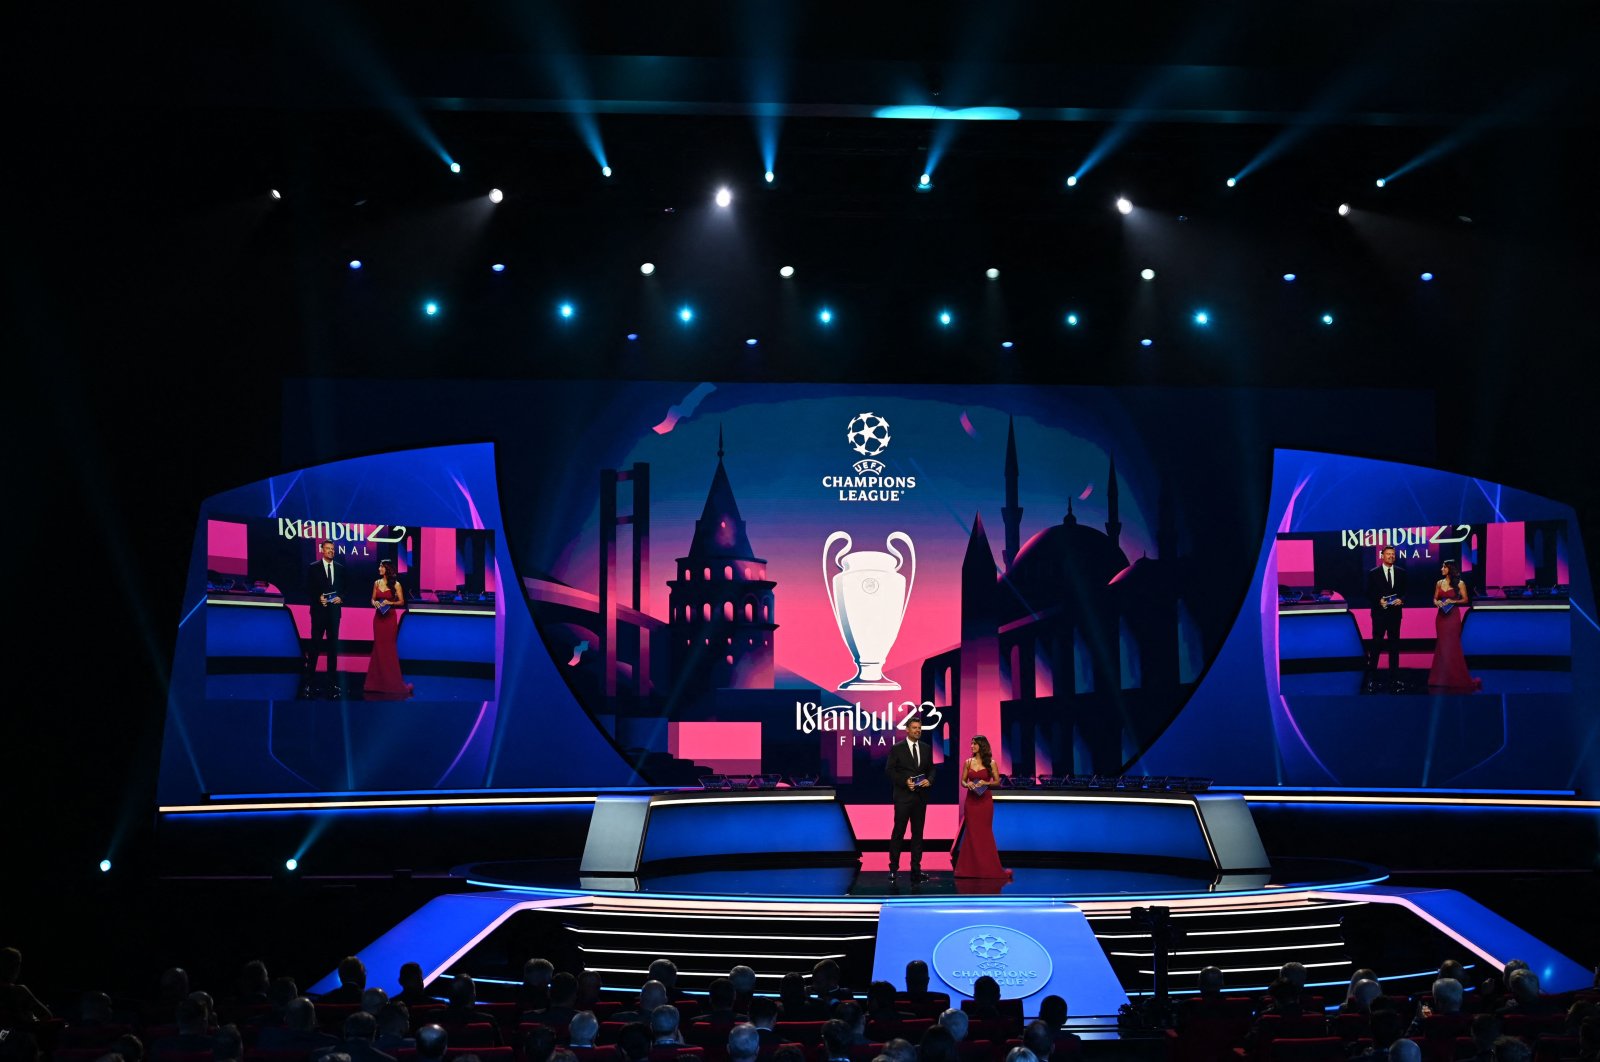 UEFA Managing Director of Communications Pedro Pinto (L) looks on next to British journalist Reshmin Chowdhury on stage during the draw ceremony for the 2022-2023 UEFA Champions League football tournament in Istanbul, Türkiye, Aug. 25, 2022. (AFP Photo)